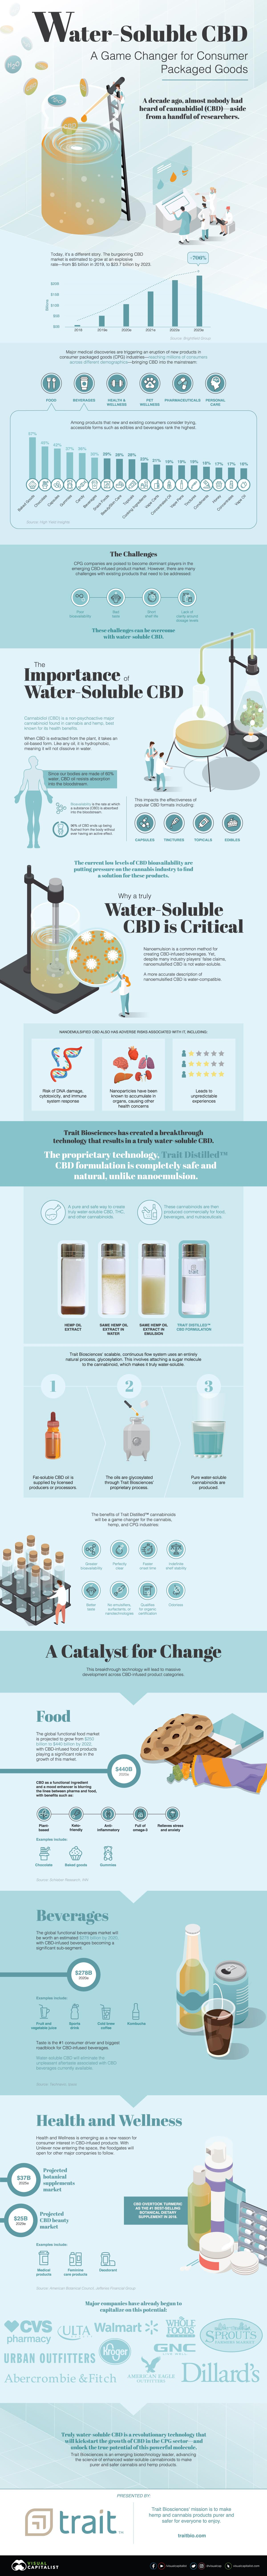 A Game Changer for Consumer Packaged Goods #infographic